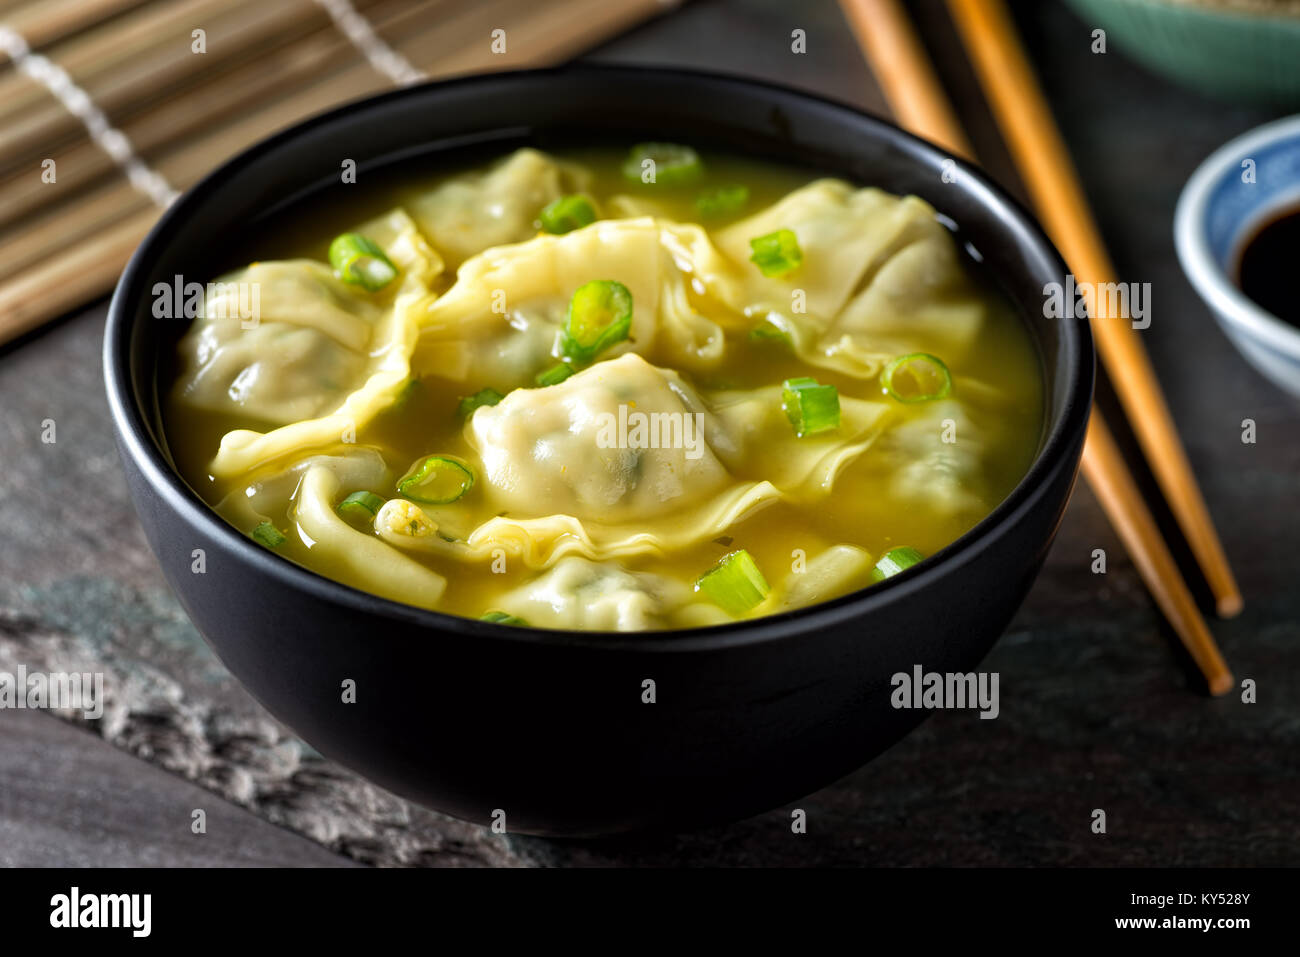 A bowl of delicious chinese wonton soup with green onion garnish. Stock Photo